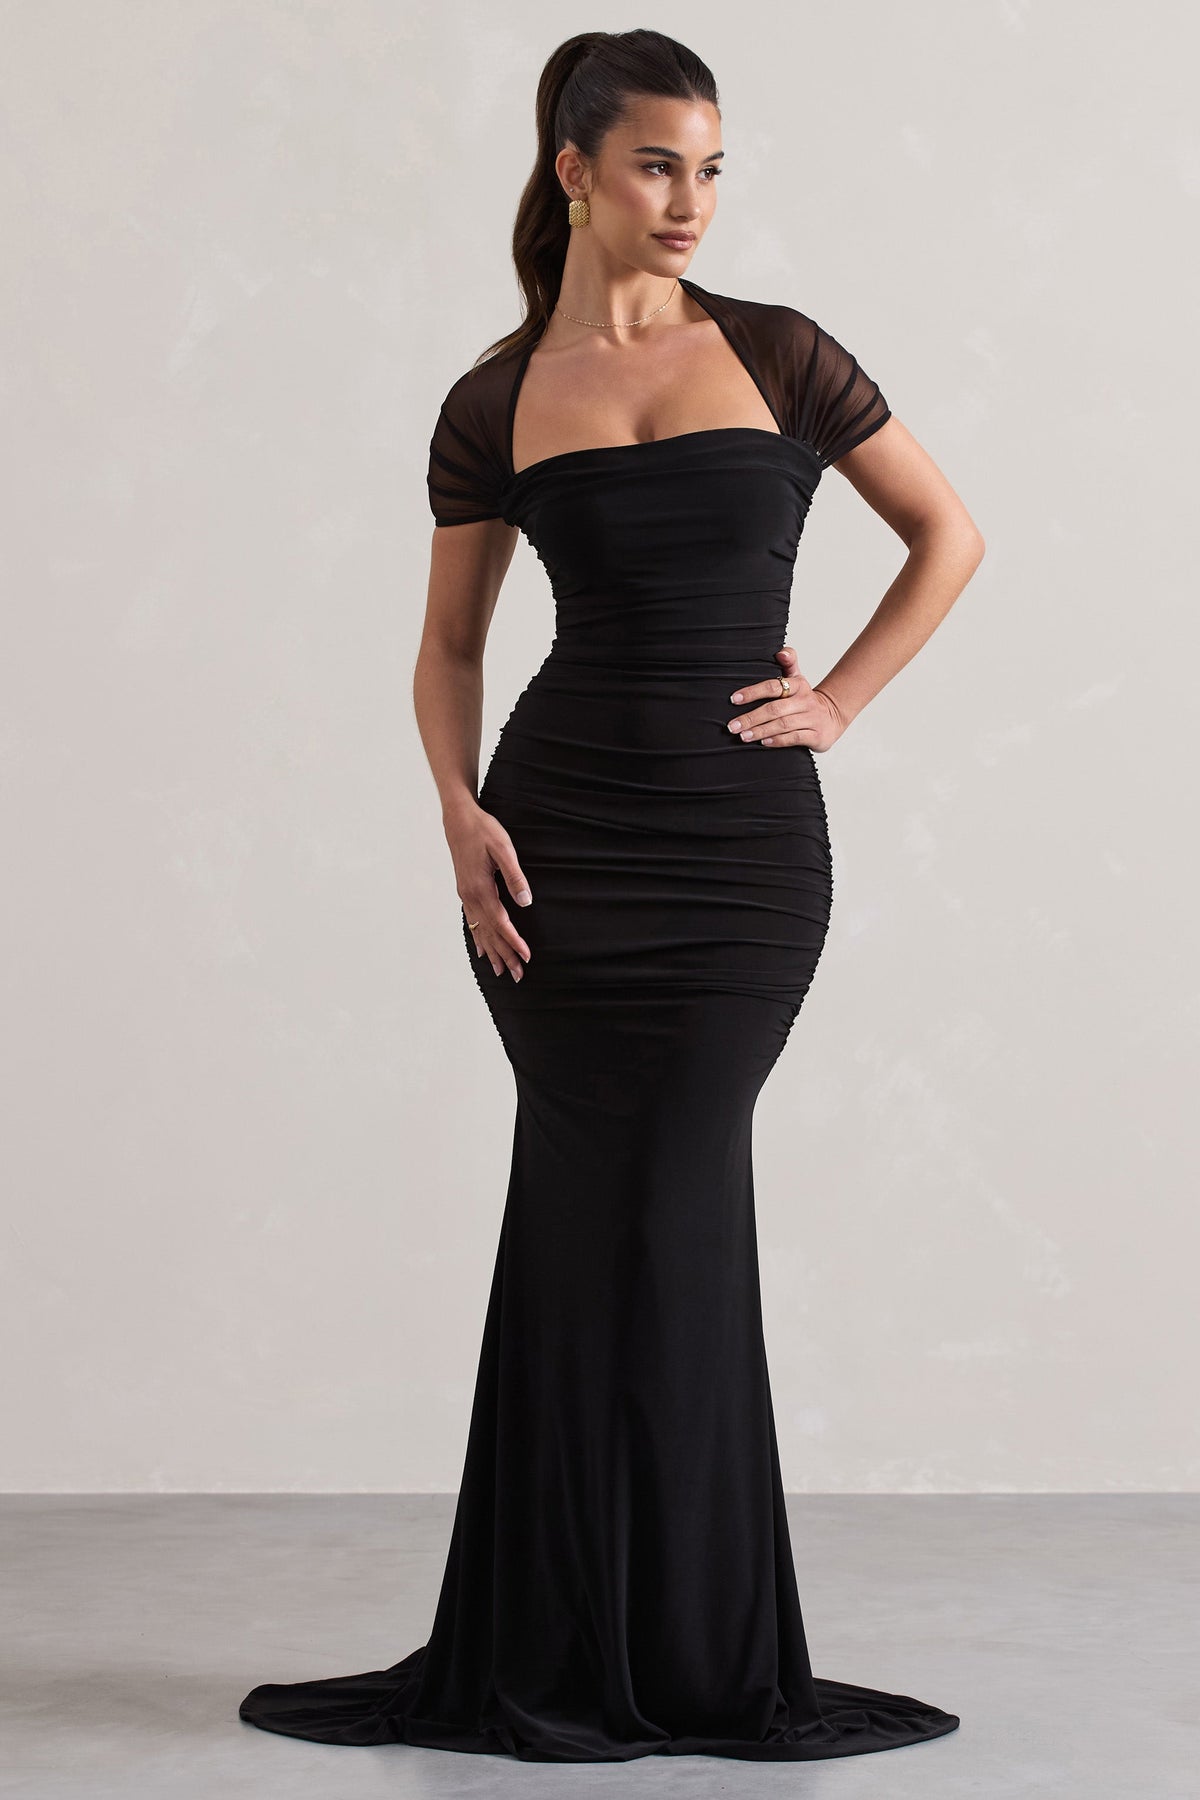 Prophecy Black Fishtail Maxi Dress With Sheer Sleeves – Club L 